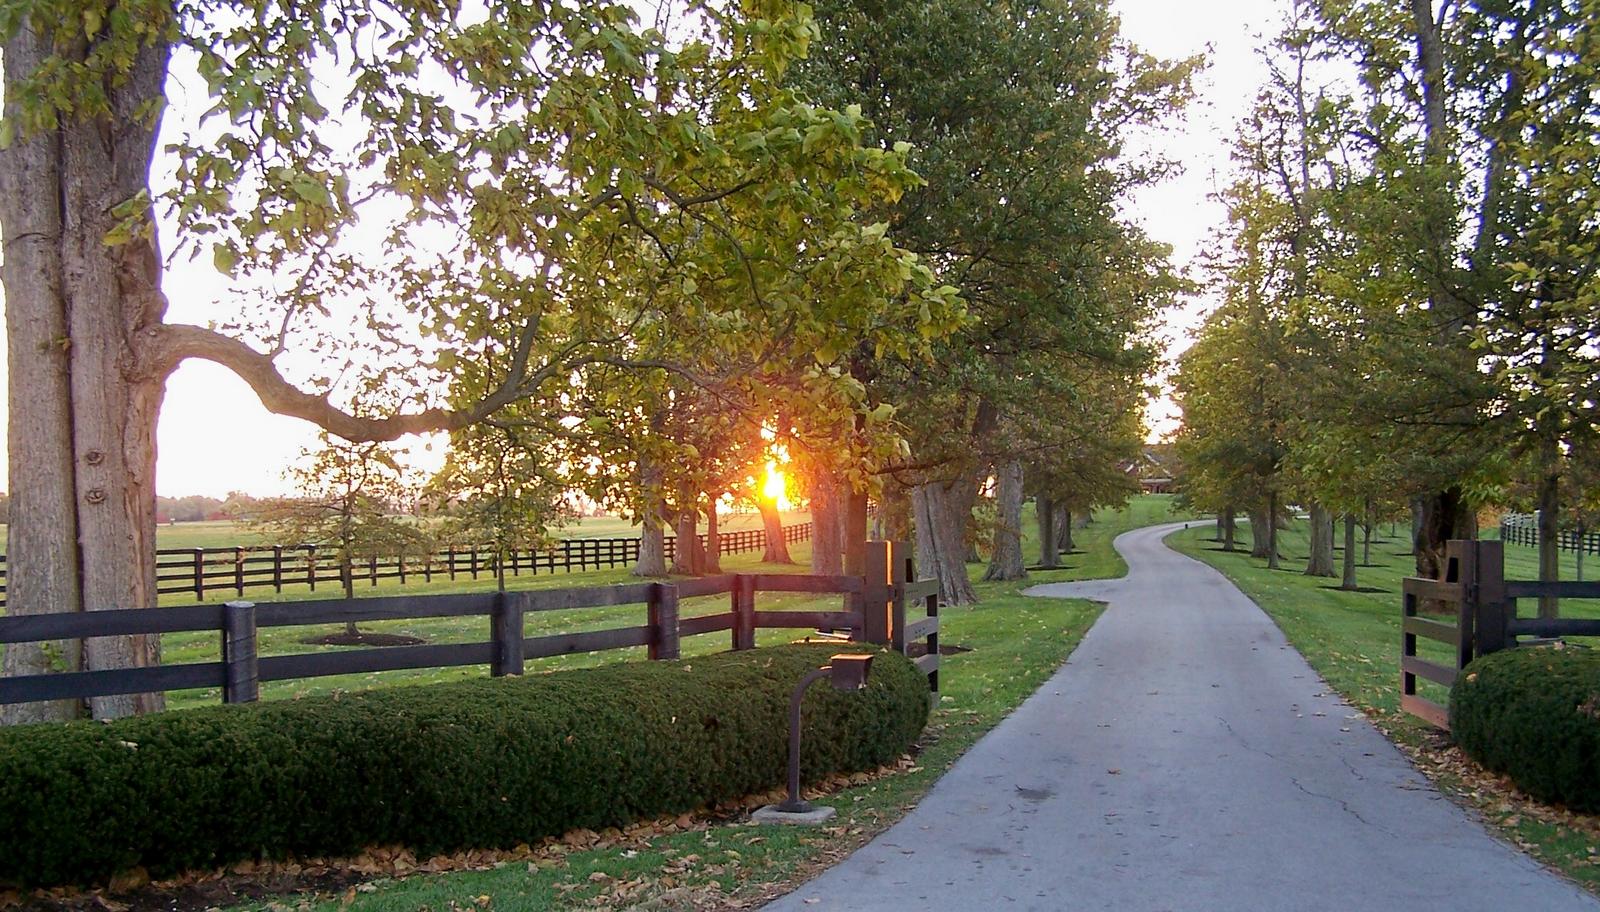 driveway entrance with fence | Driveways | Pinterest